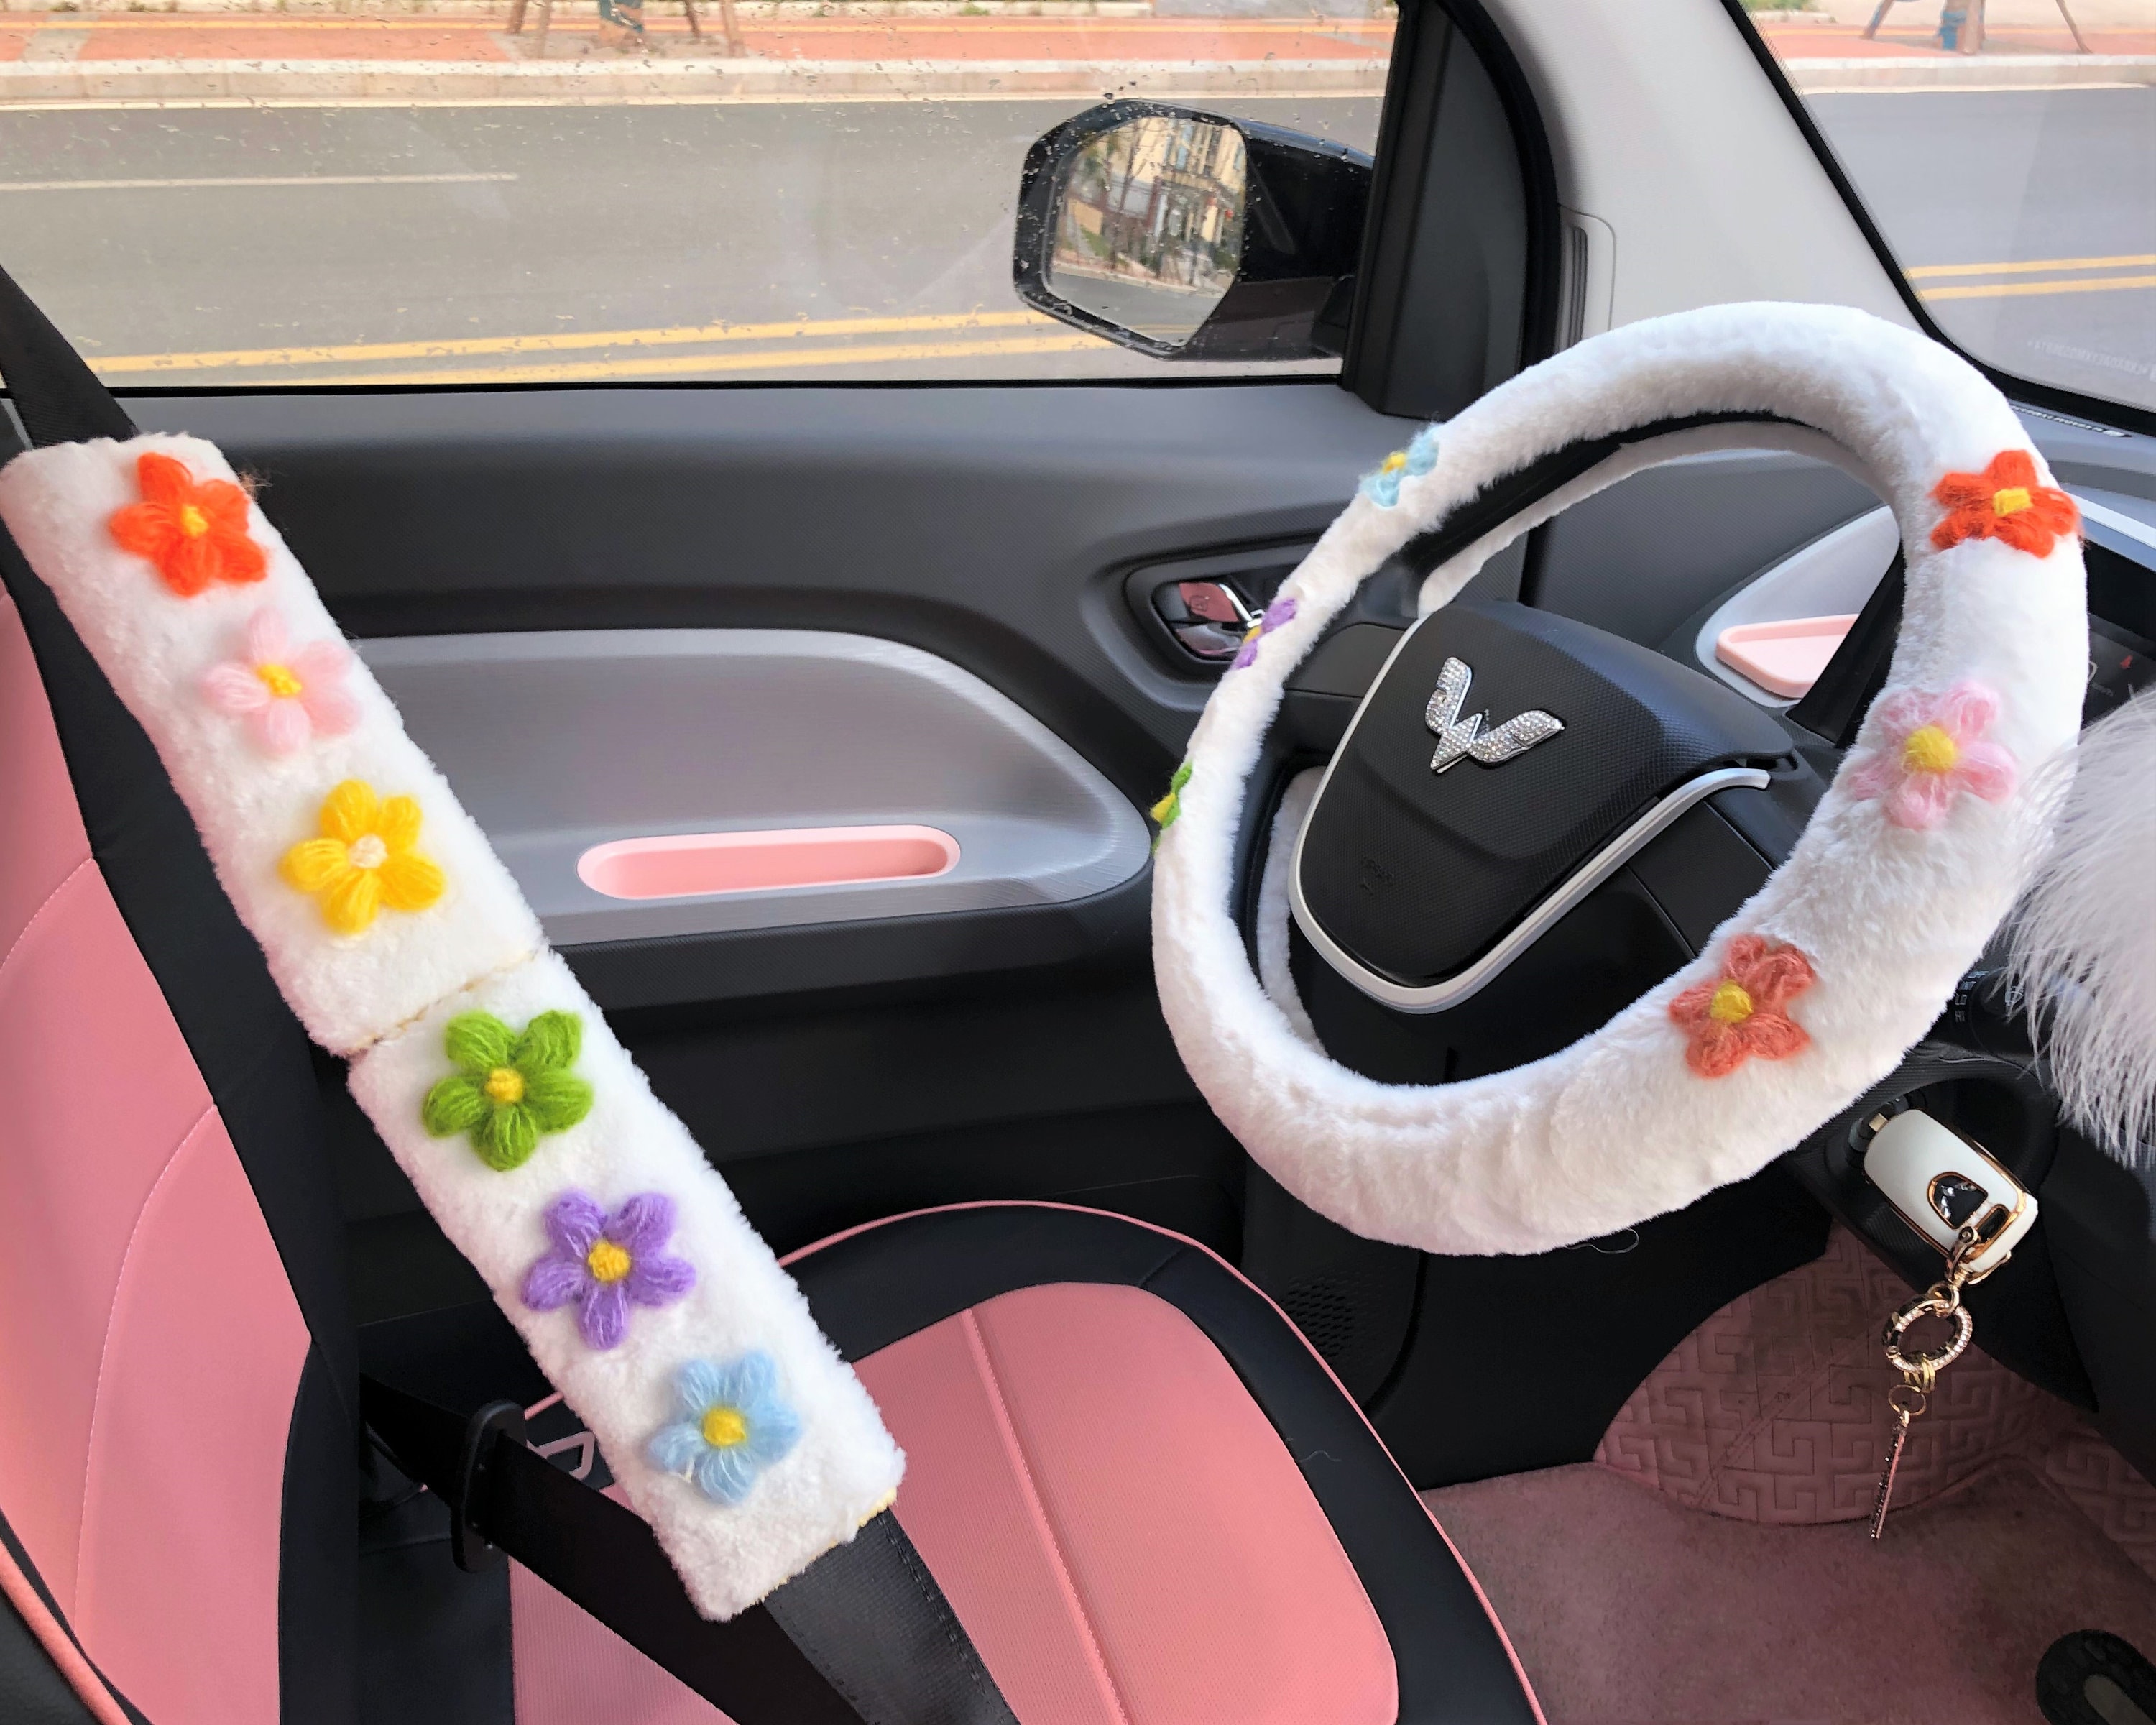 5 Pcs Fluffy Steering Wheel Covers Set Cute Furry Wool Car Accessories Decoration with Handbrake Cover,Gear Shift,Shoulder Guard Cover,Universal 15